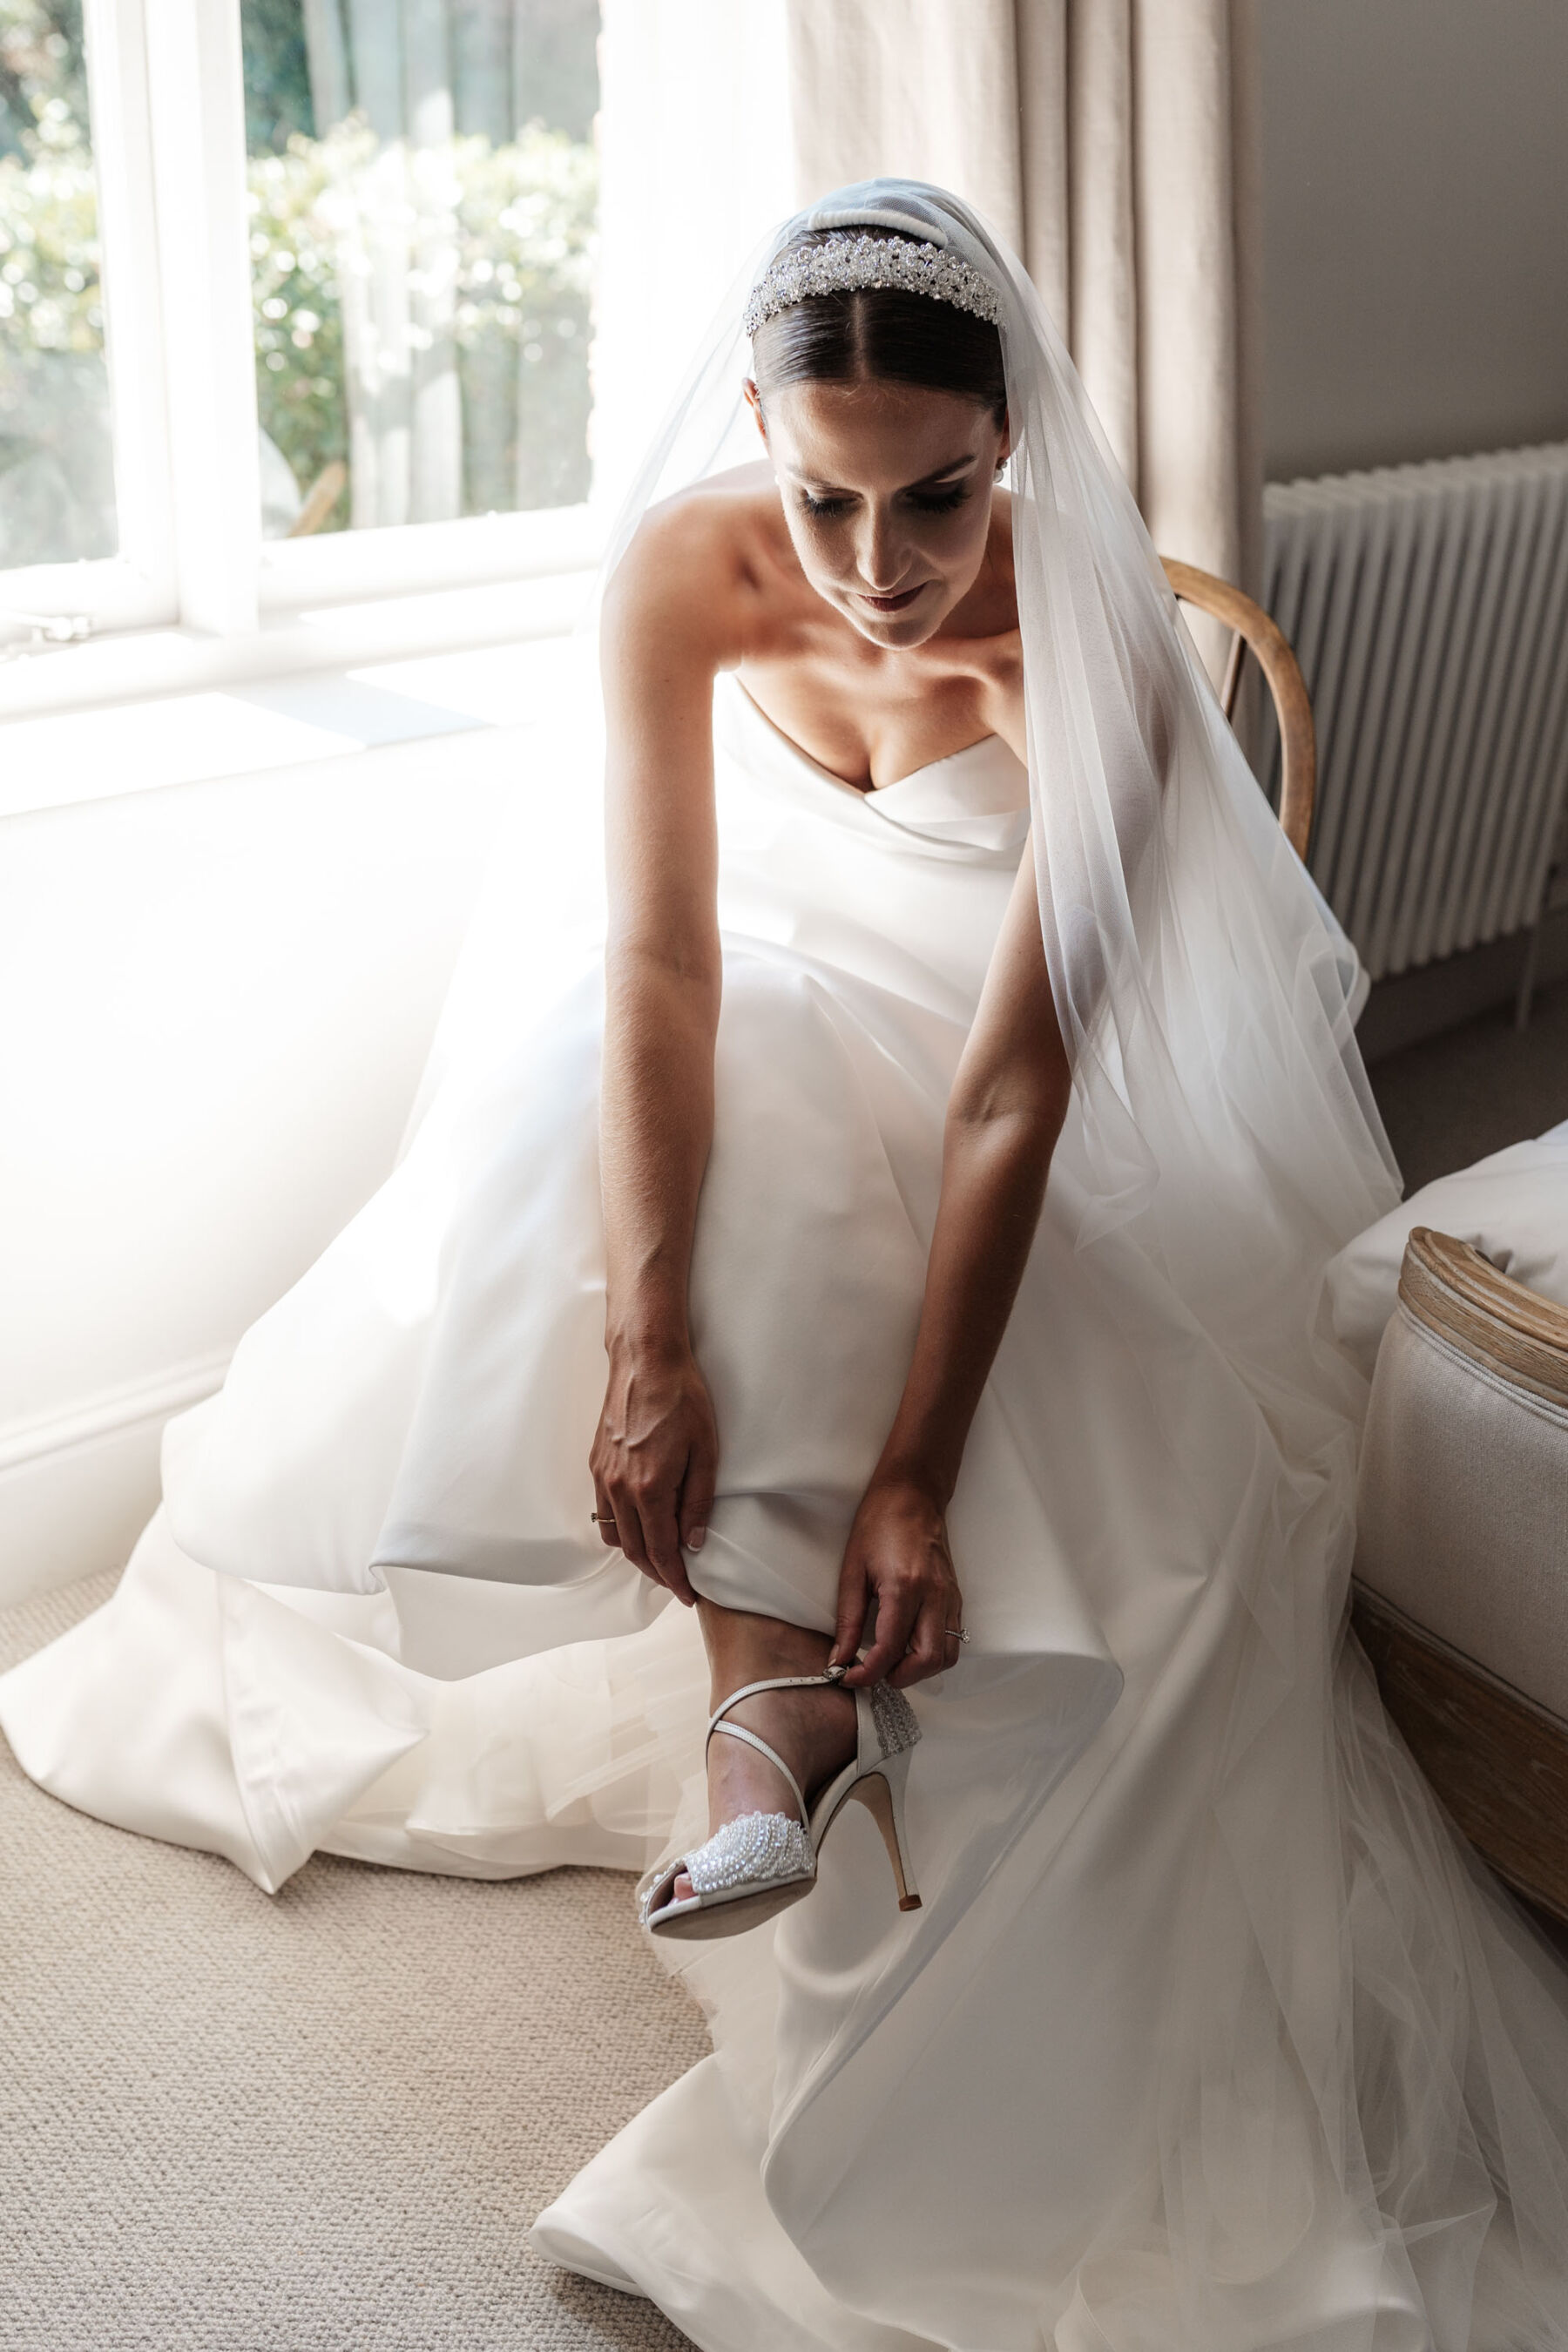 Bride putting on Emmy London wedding shoes on the morning of her wedding. Suzanne Neville wedding dress.